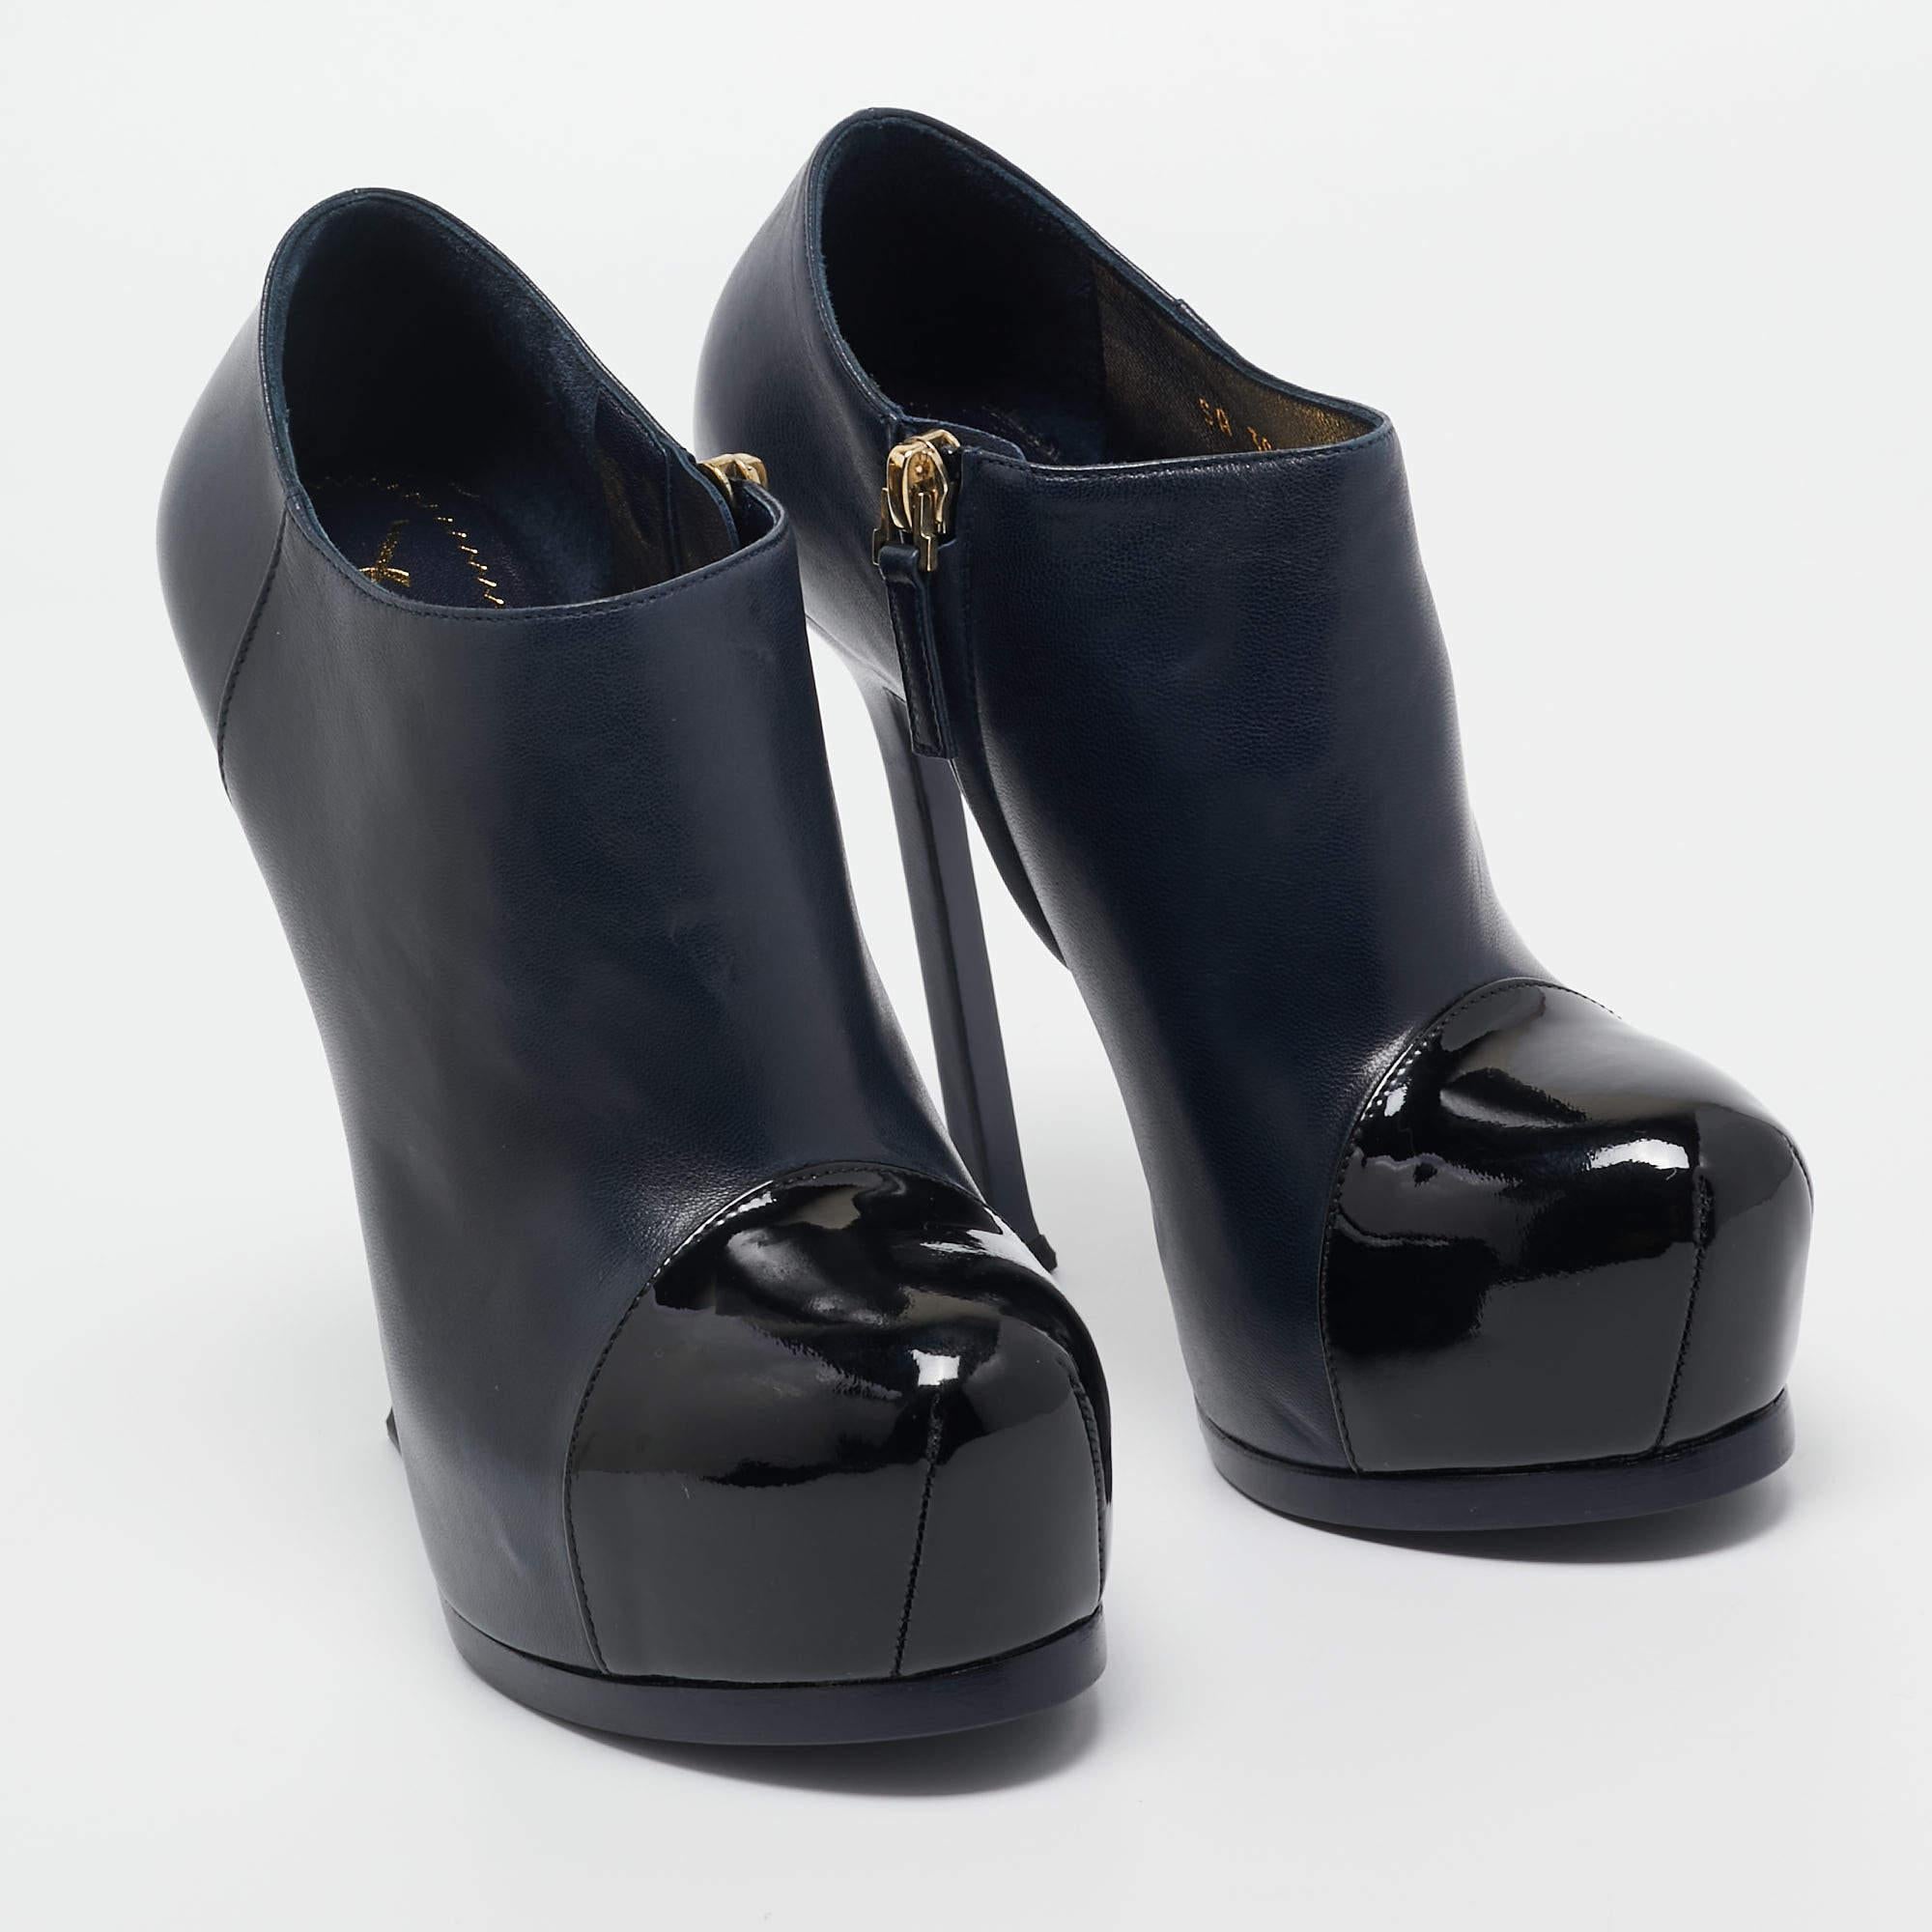 Yves Saint Laurent Navy Blue/Black Leather and Patent Leather Tribute Platform A For Sale 2